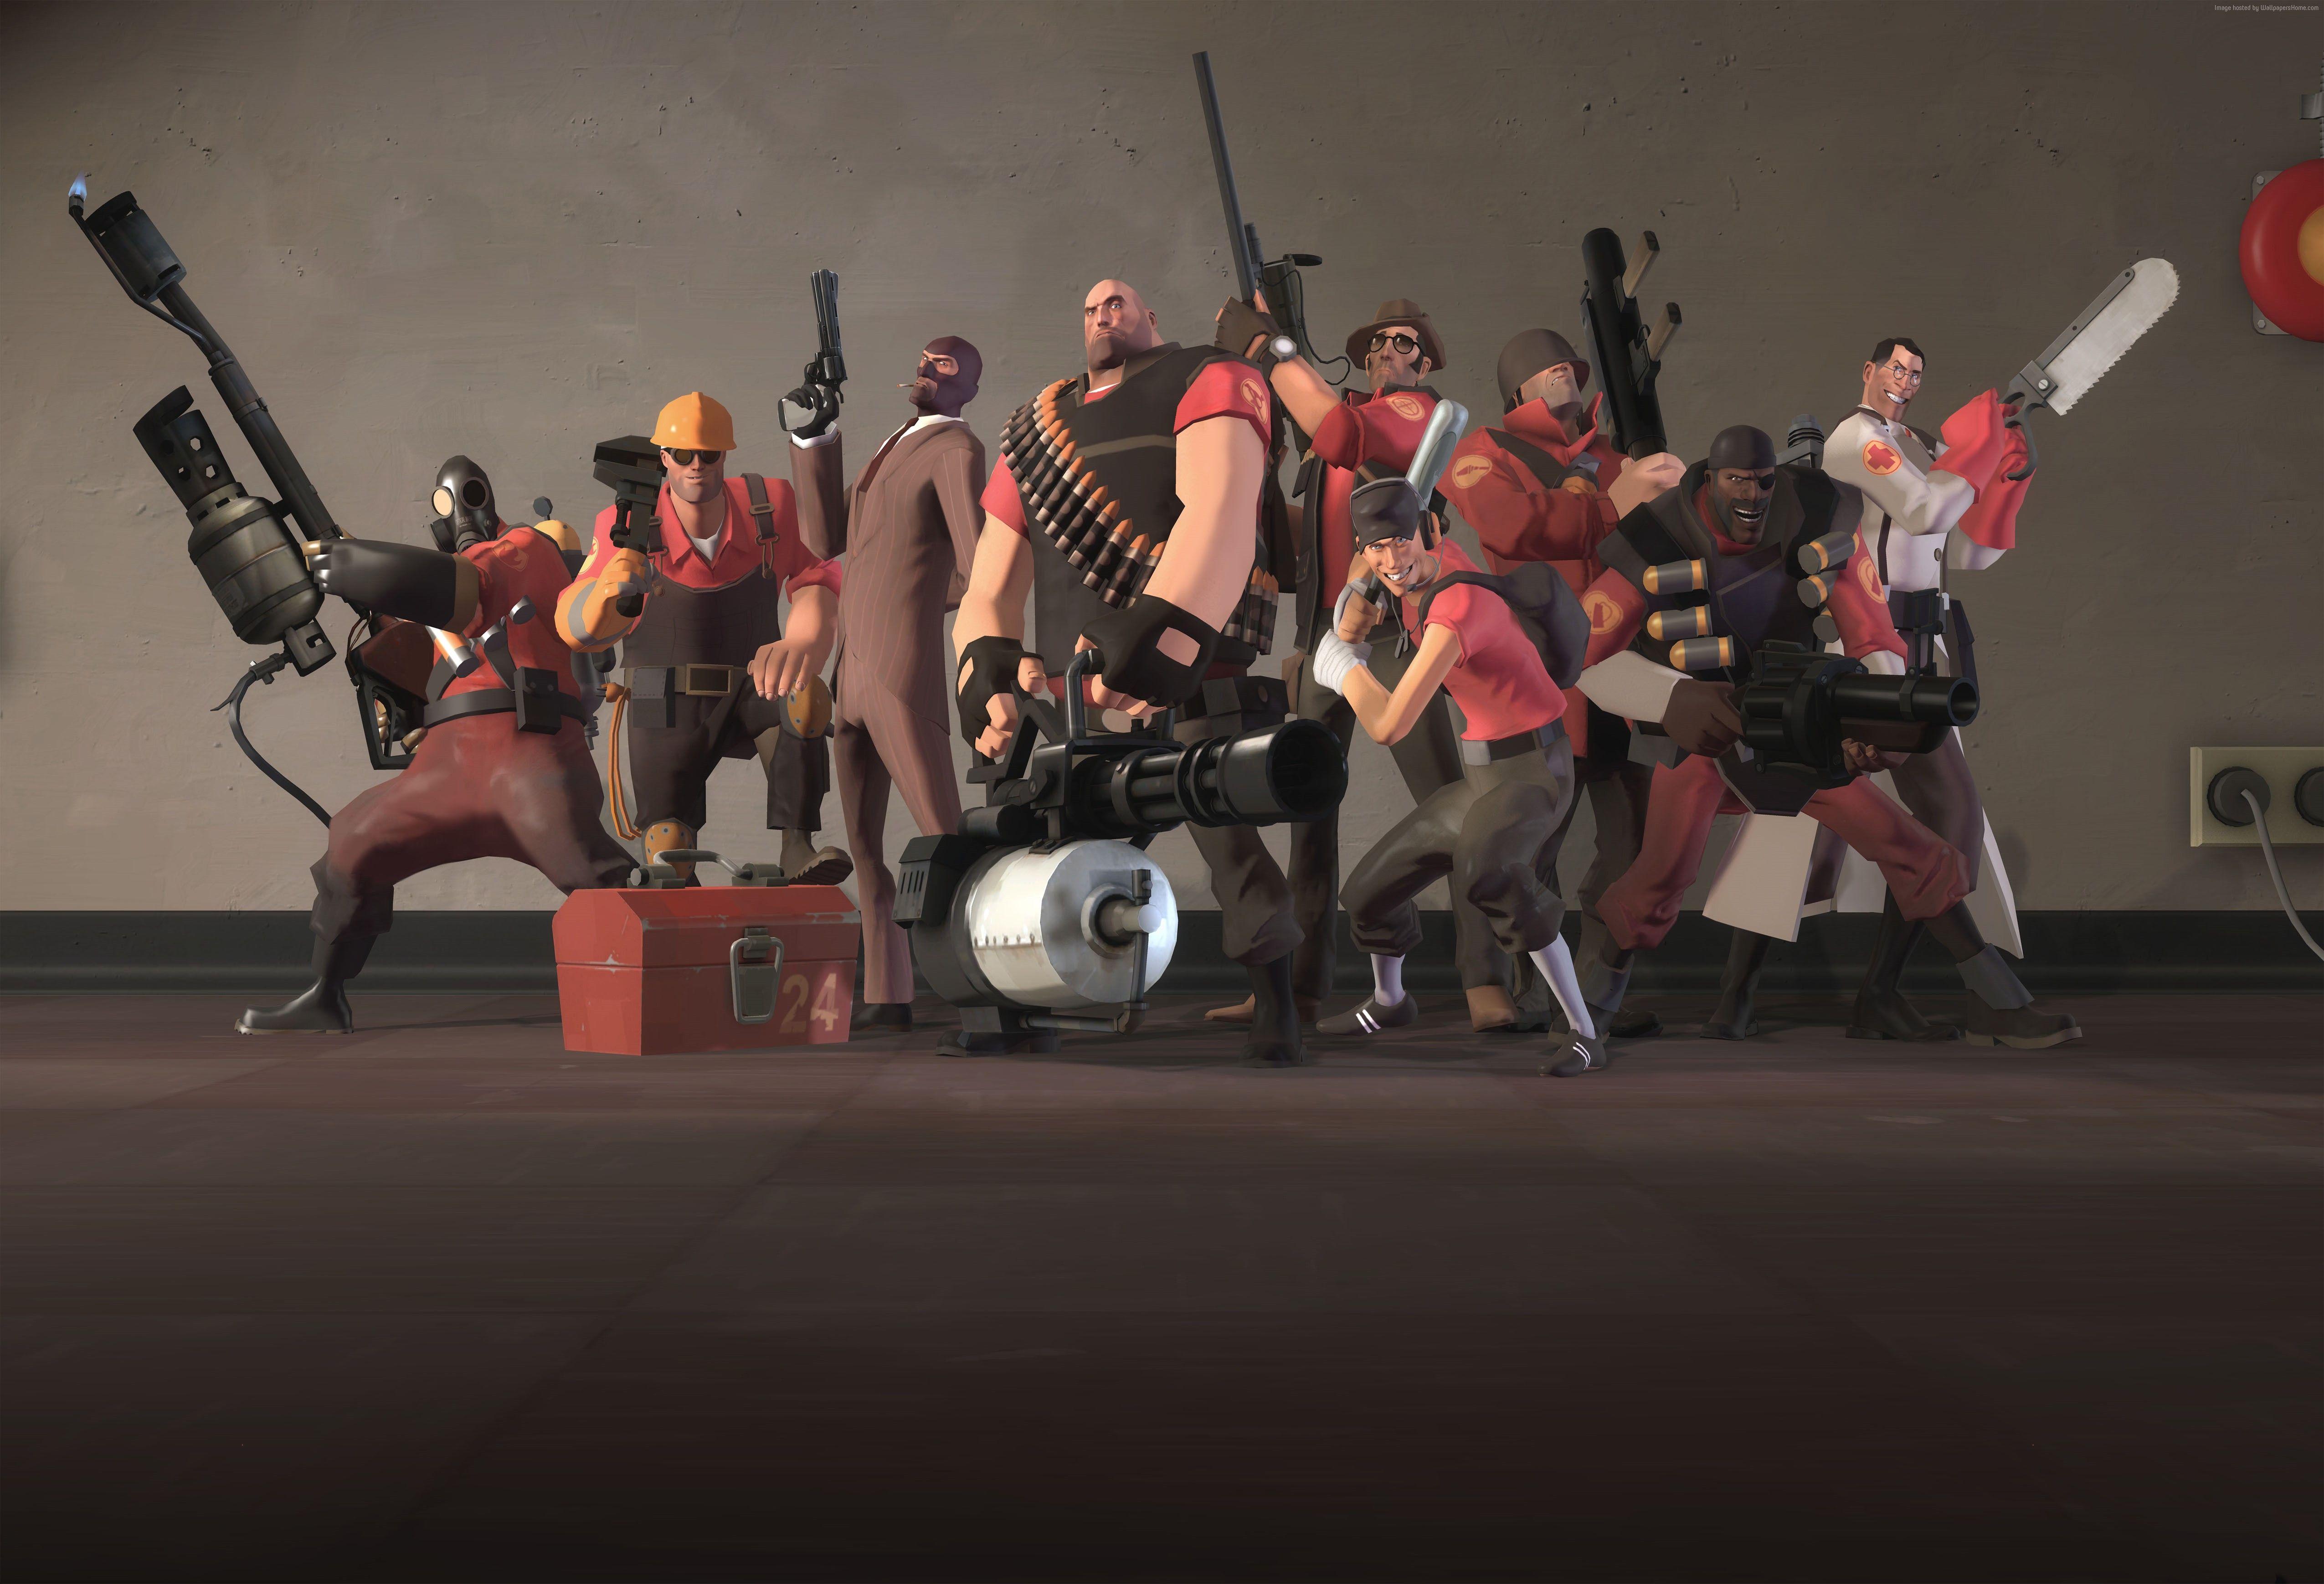 Wallpaper ID 476899  Video Game Team Fortress 2 Phone Wallpaper   720x1280 free download